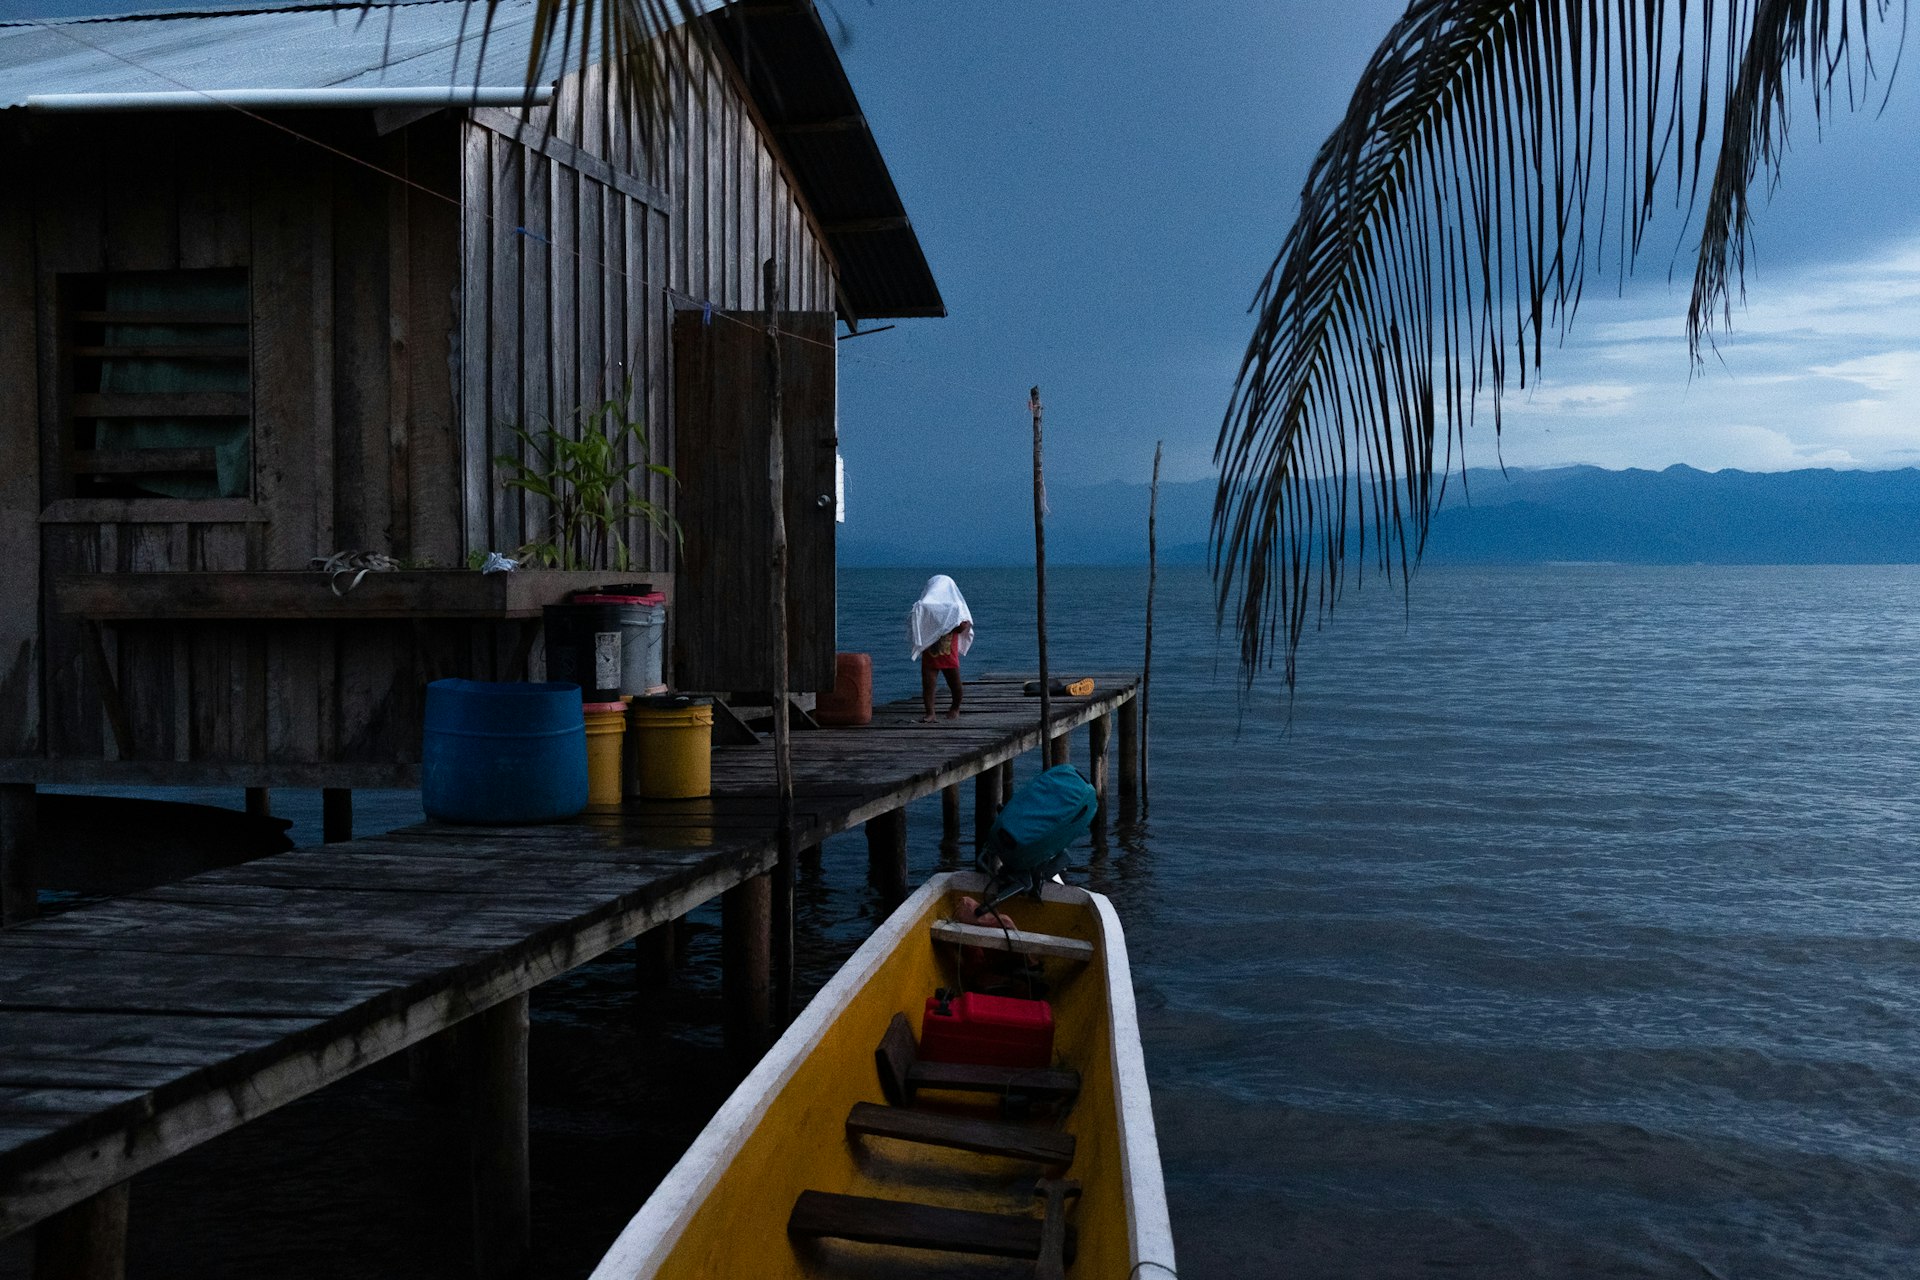 A kid from Cayo de Agua Island gets the laundry from the outside, Bocas del Toro, Panama